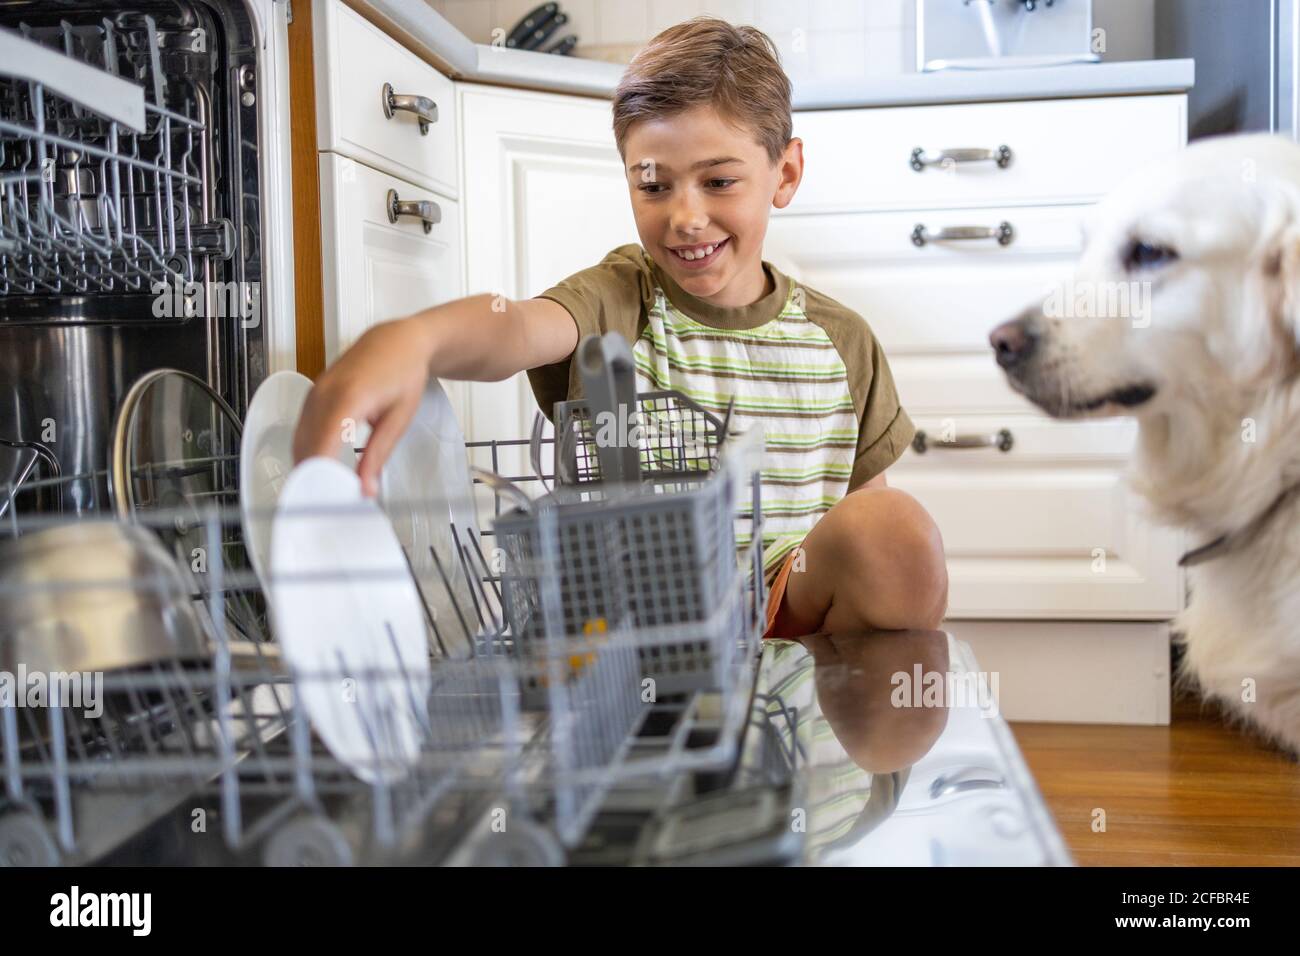 Little boy loading the dishwasher at home Stock Photo